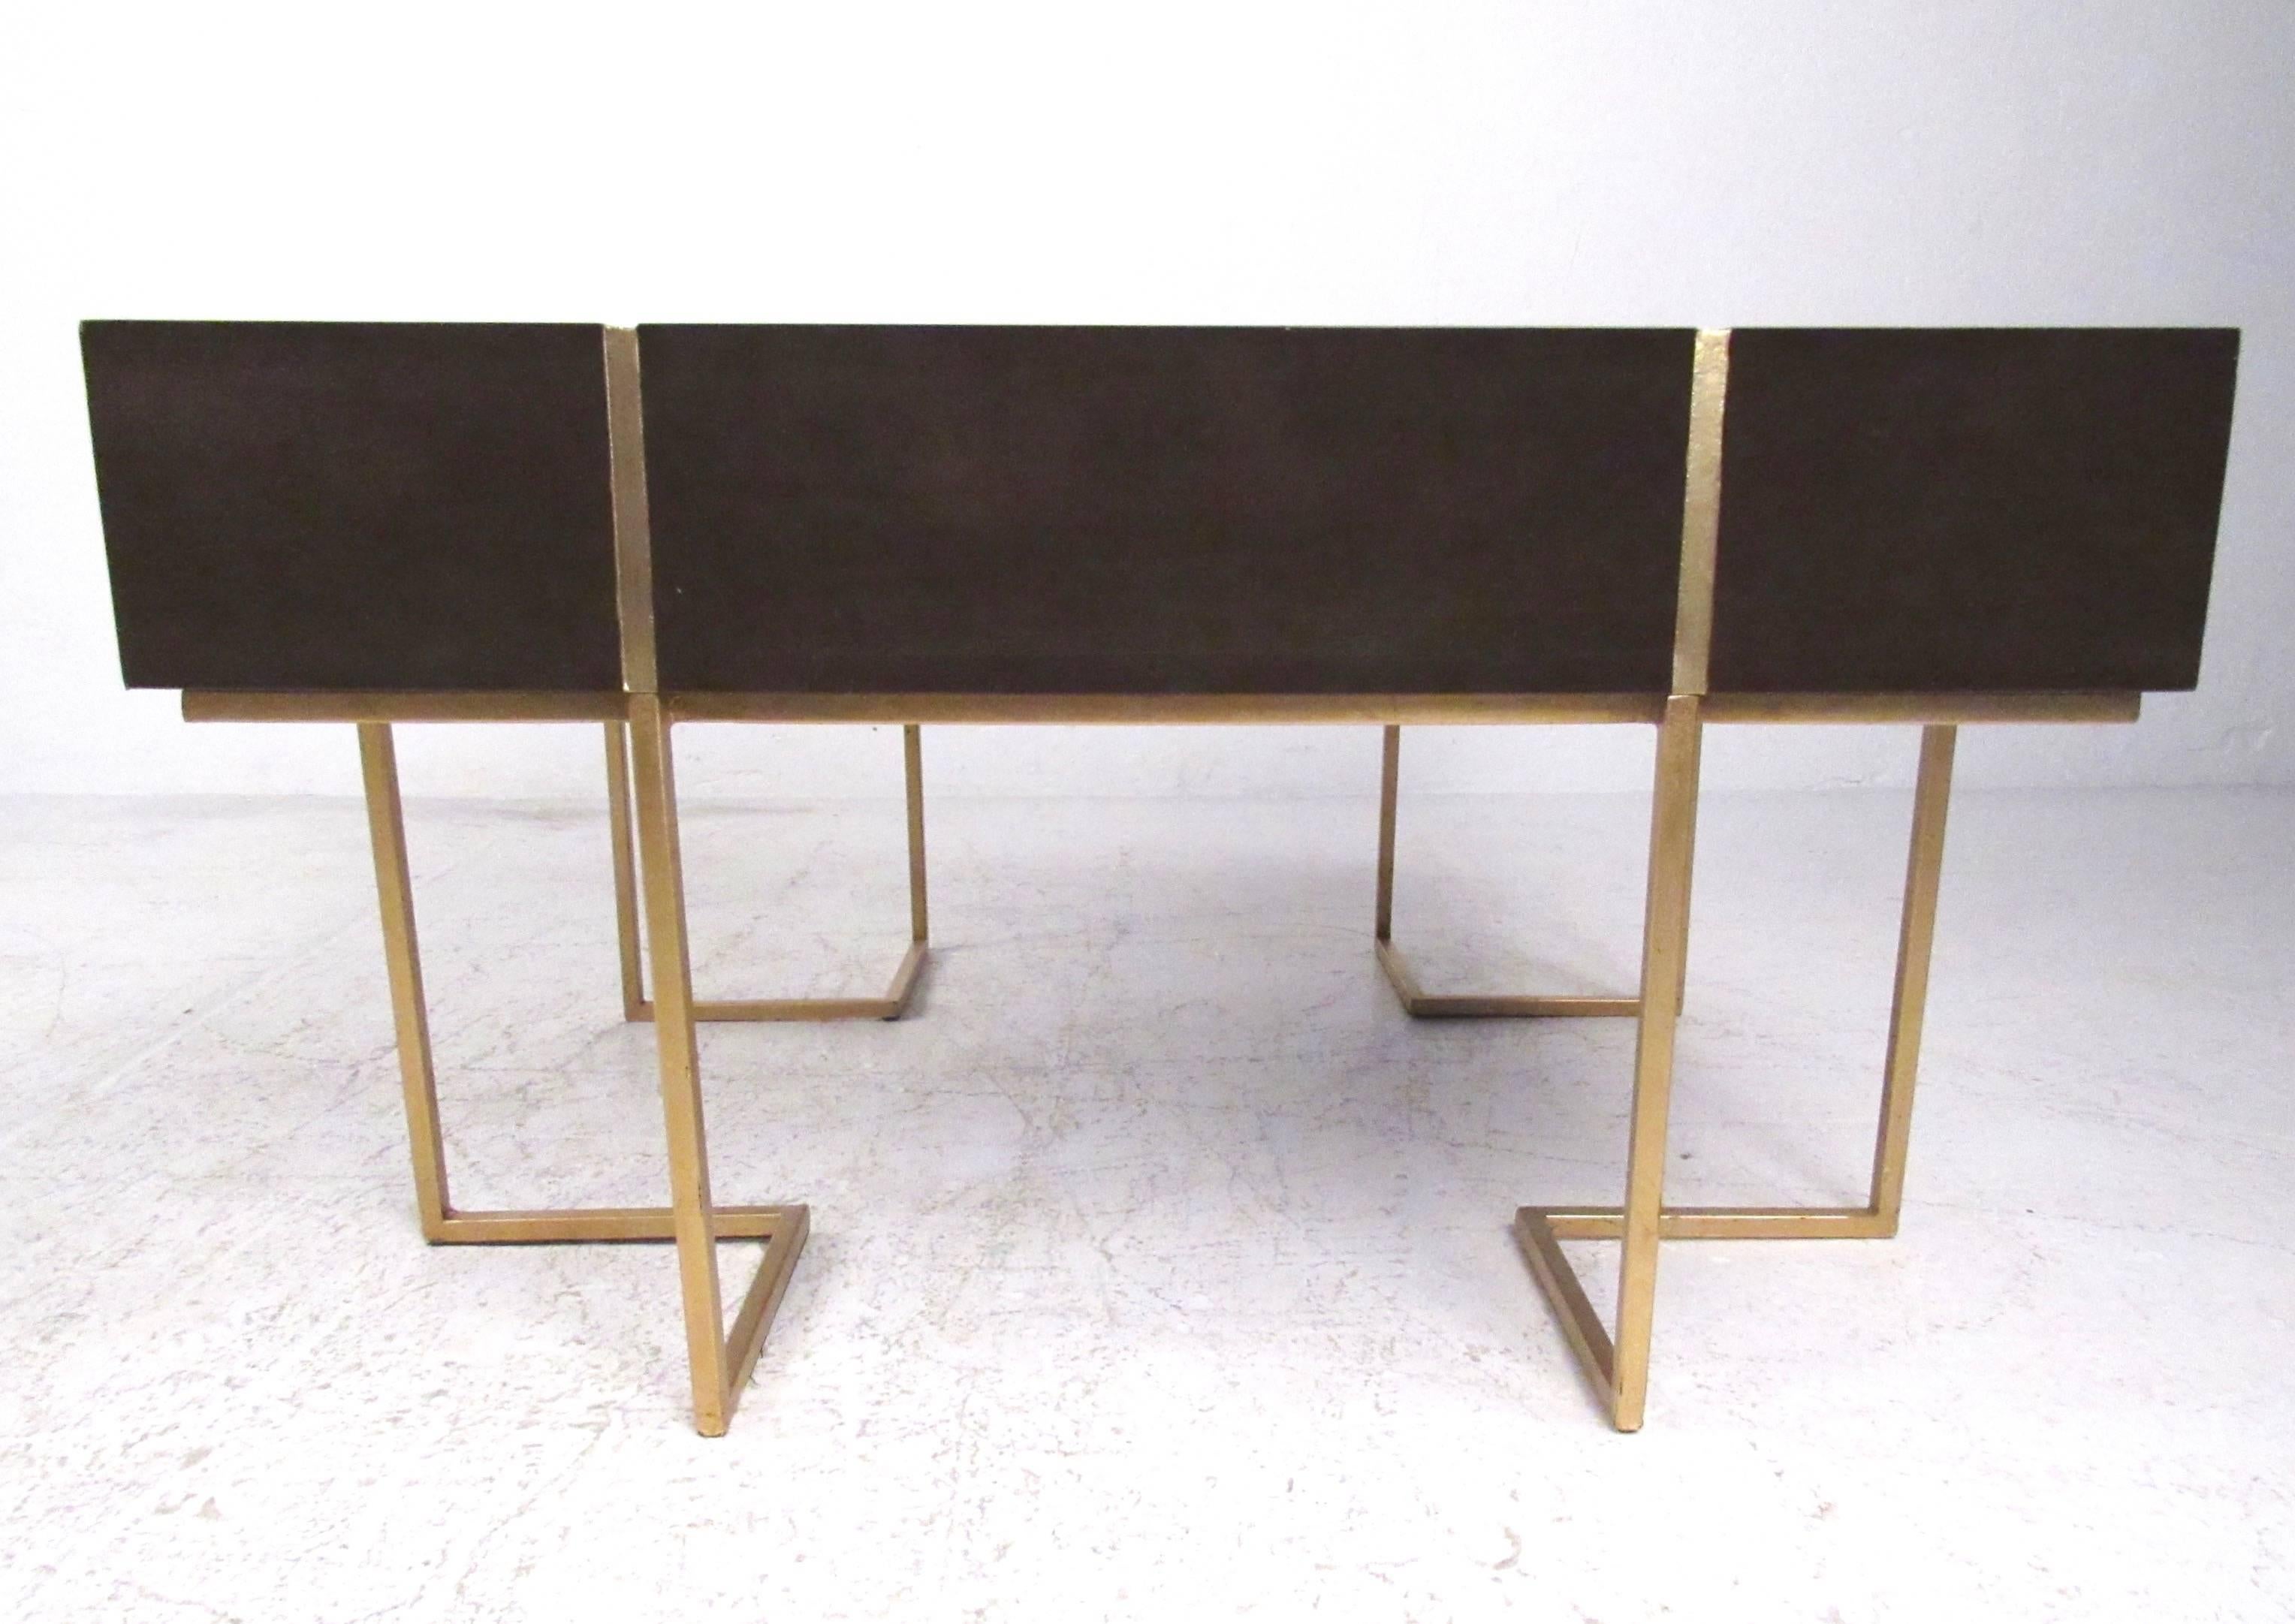 This stylish hardwood coffee table features a unique sculptural gold painted base with stylish inlay and impressive design. The clean modern lines on this vintage square coffee table make this a wonderful Mid-Century addition to any interior. Please